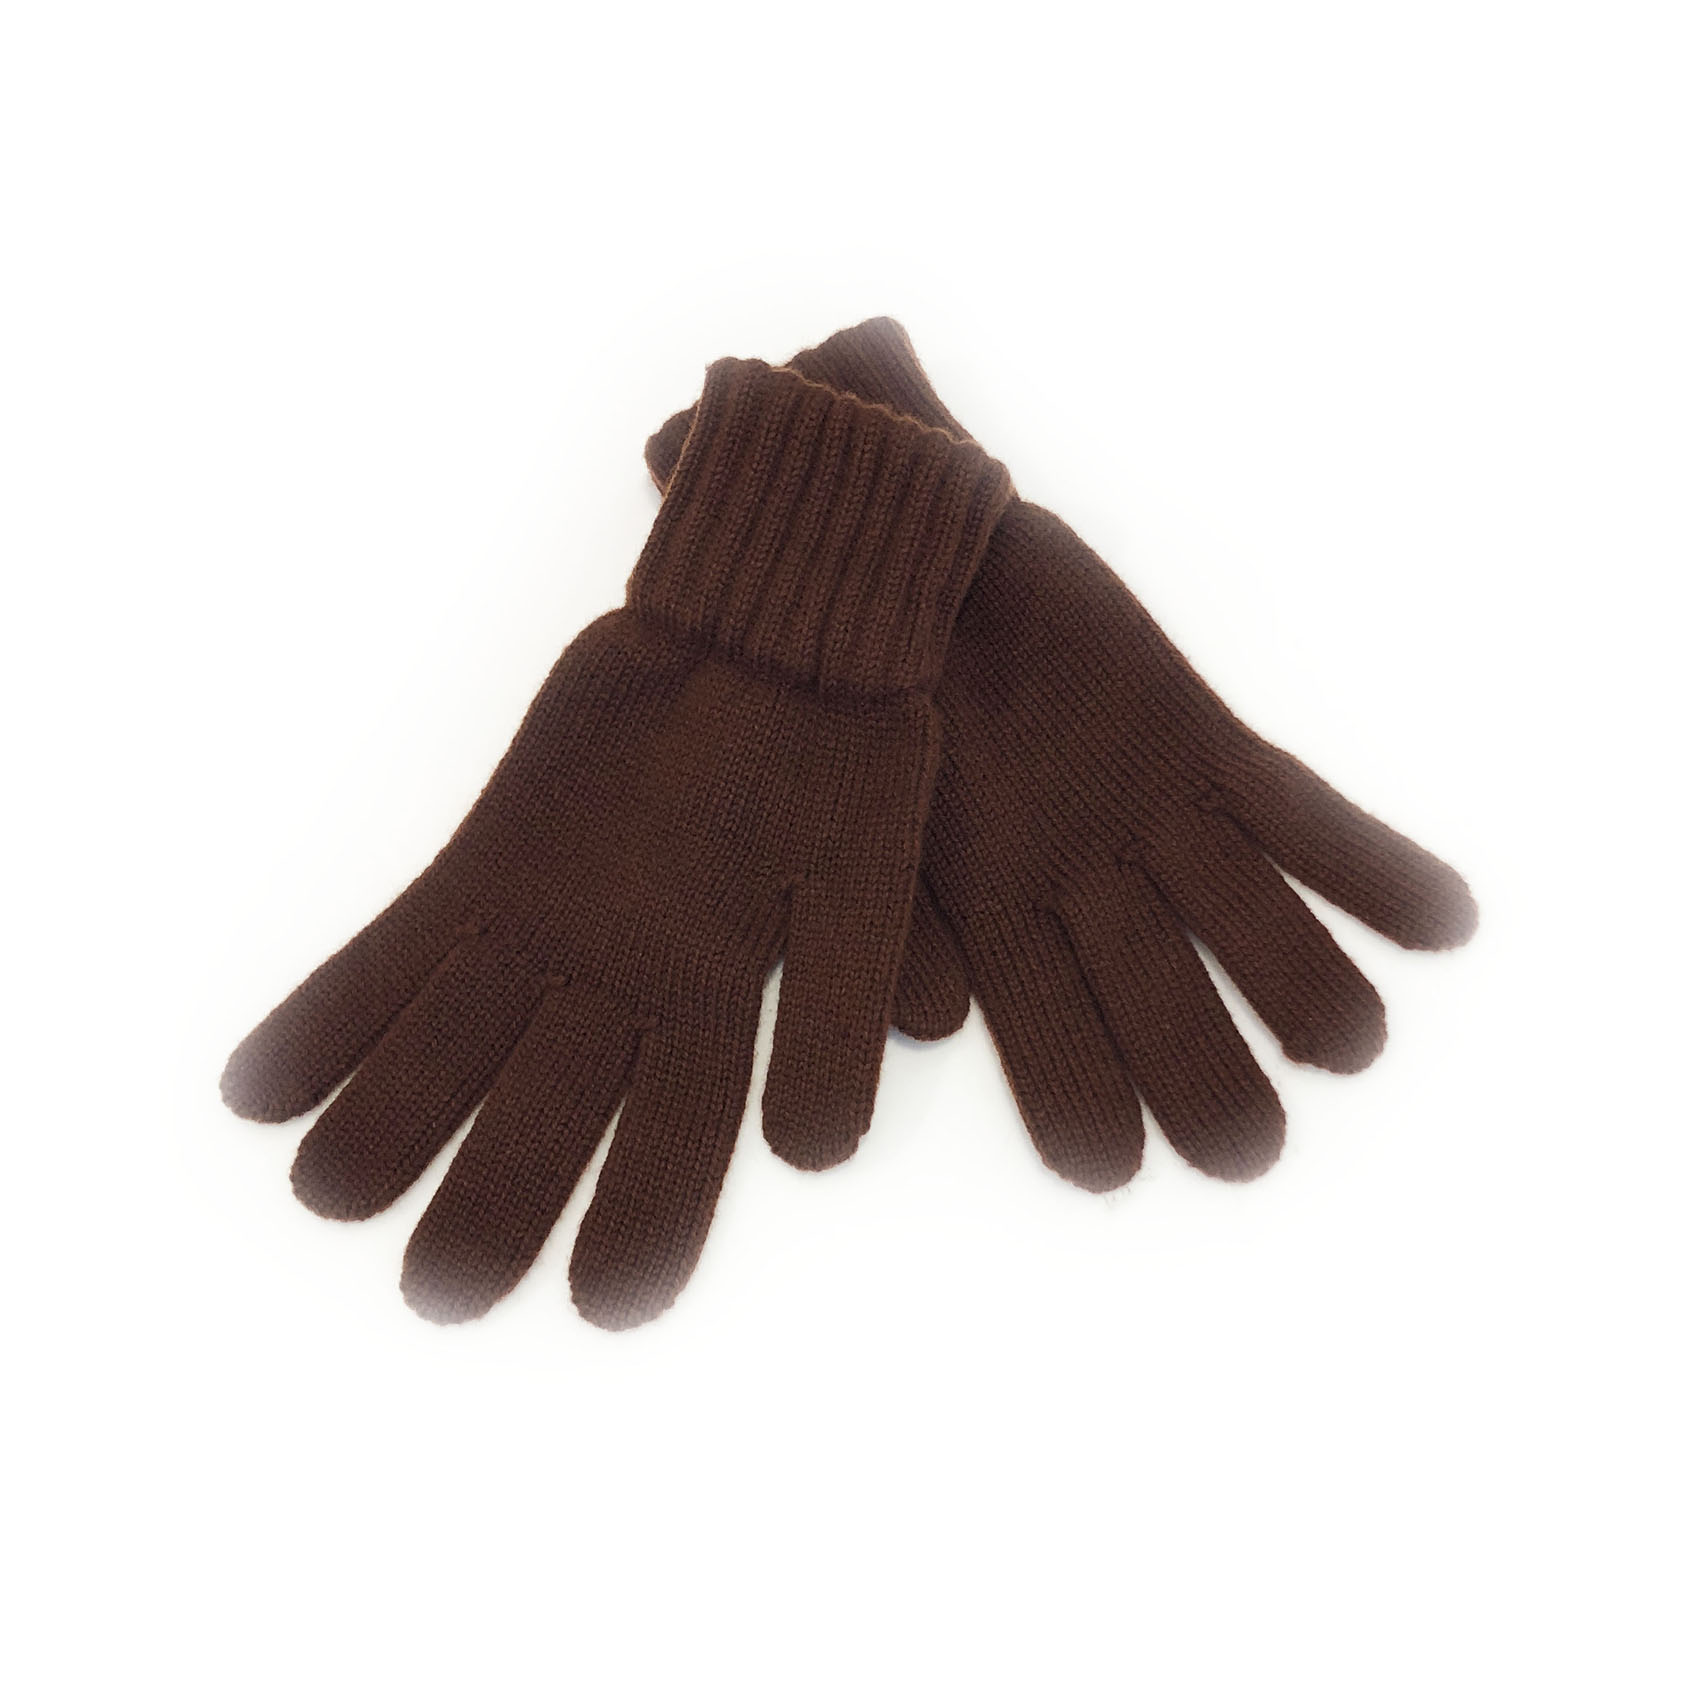 An image of Ladies 100% Cashmere Gloves - Pheasant Brown